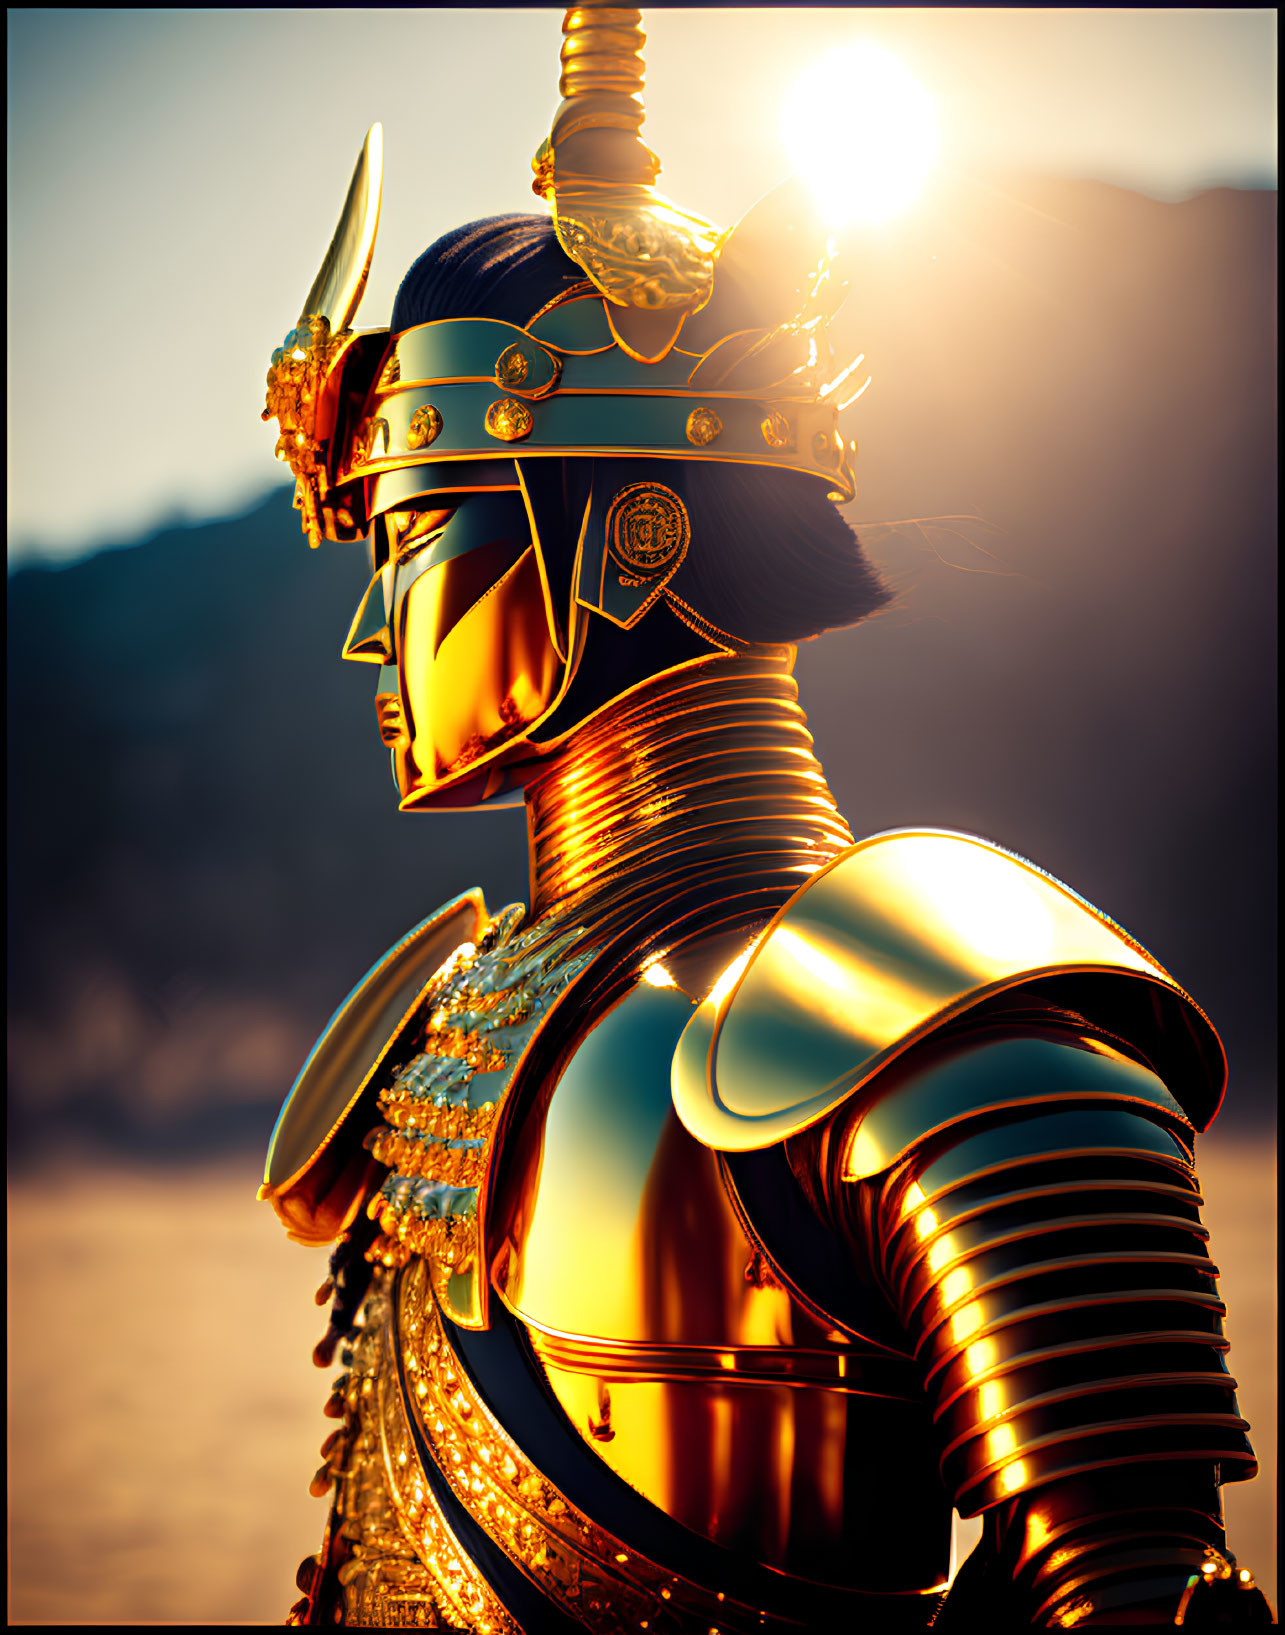 Person in ornate golden armor with helmet in front of sunburst